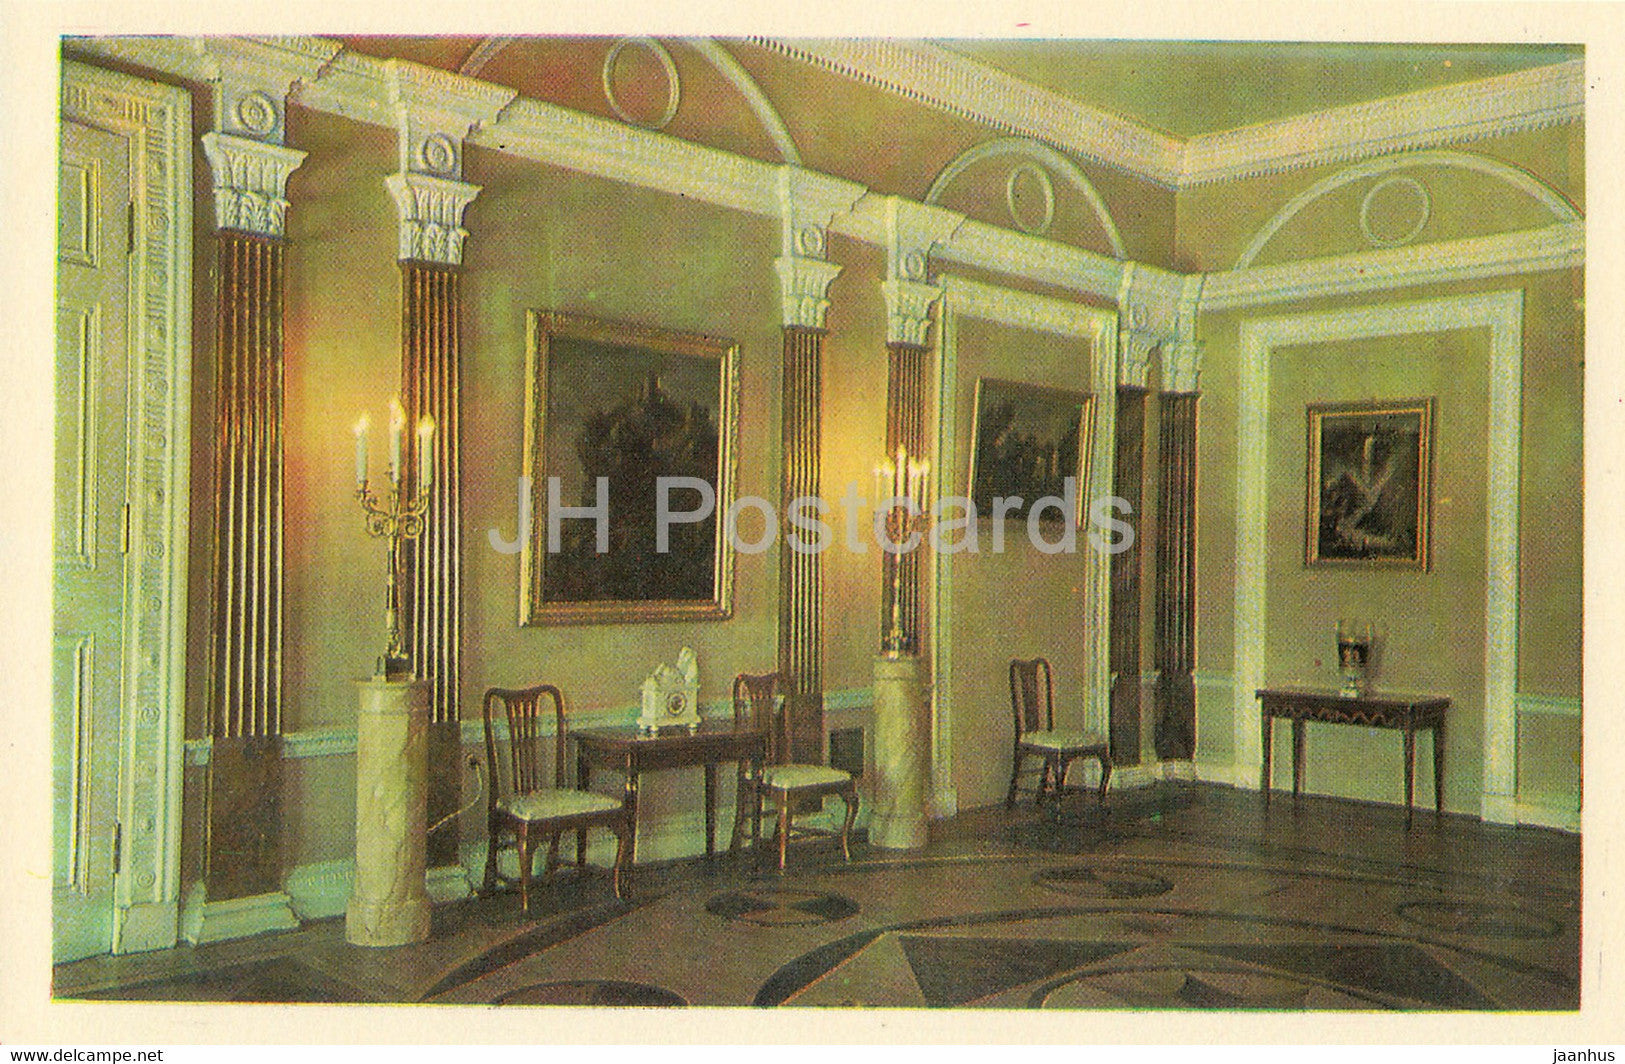 Town of Pushkin - Great (Yekaterinsky) Palace - Waiters quarters - 1971 - Russia USSR - unused - JH Postcards